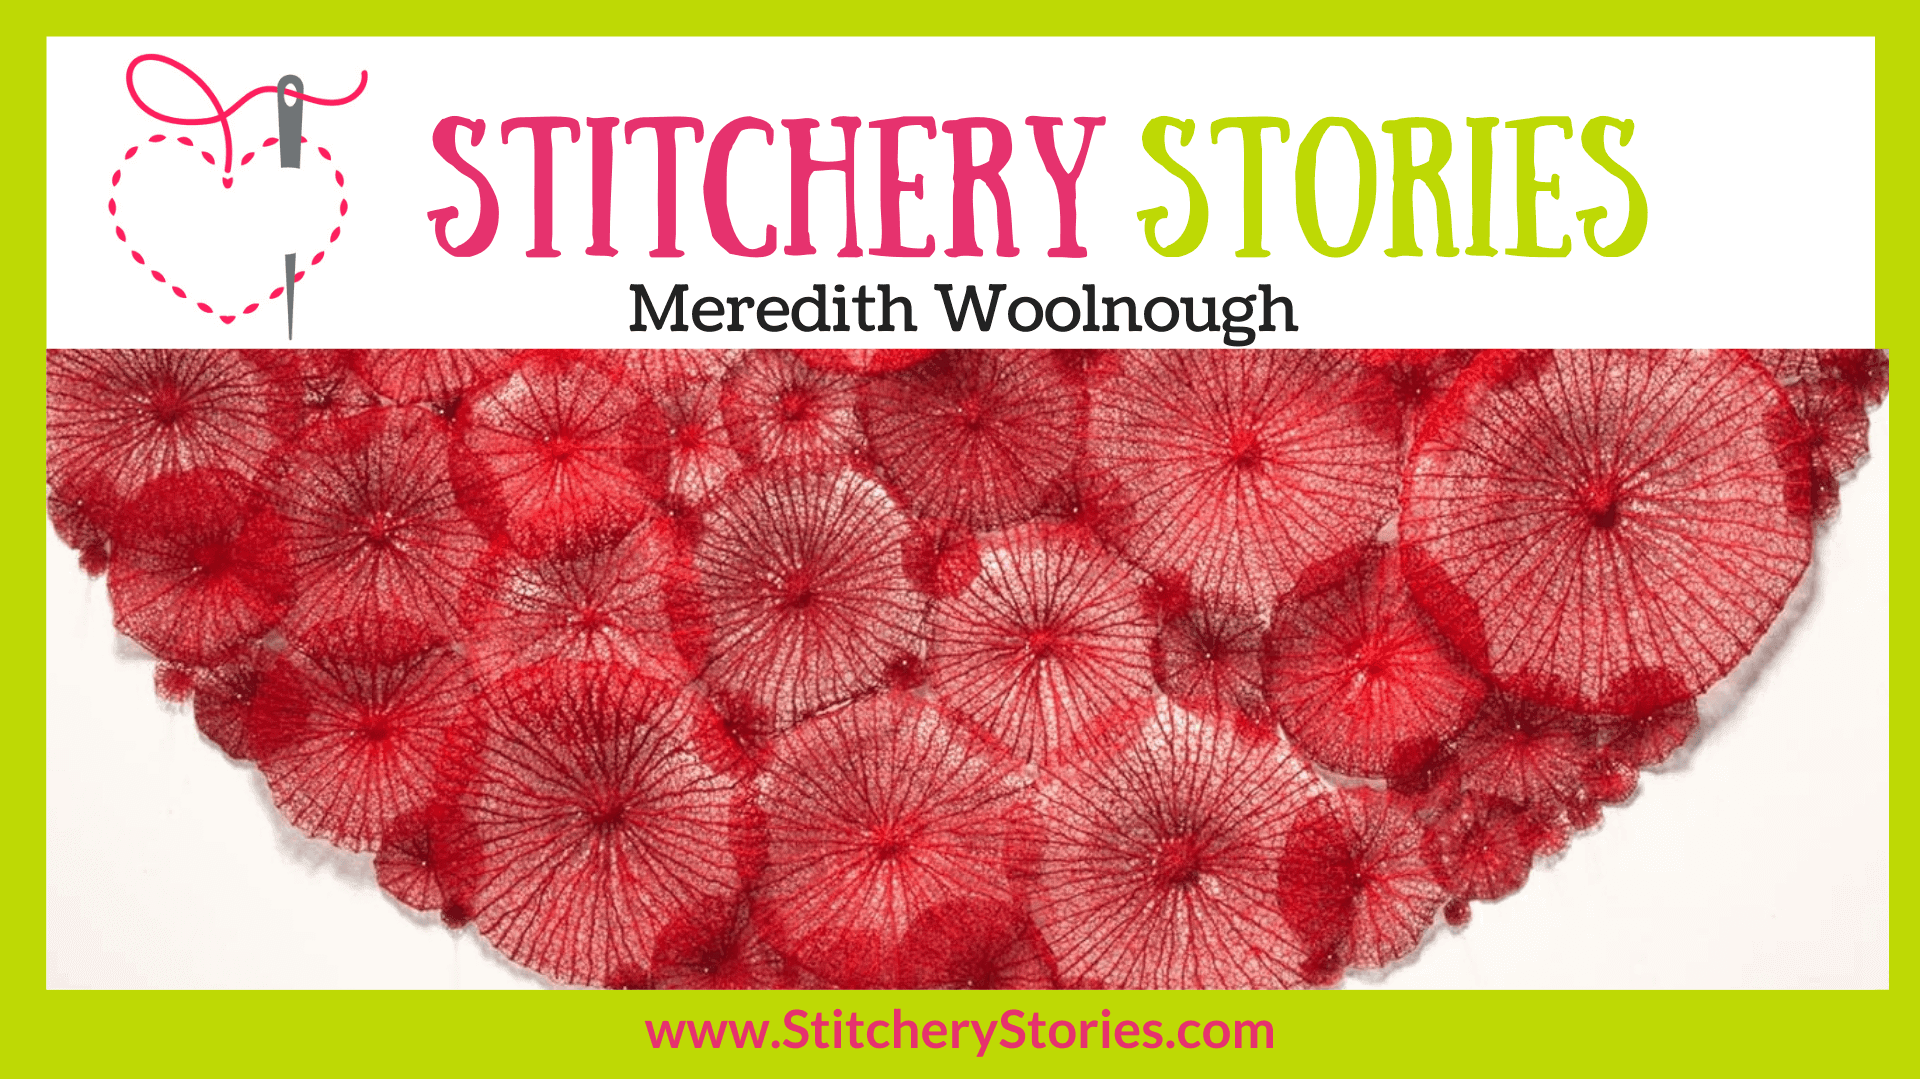 Meredith Woolnough guest Stitchery Stories textile art podcast Wide Art